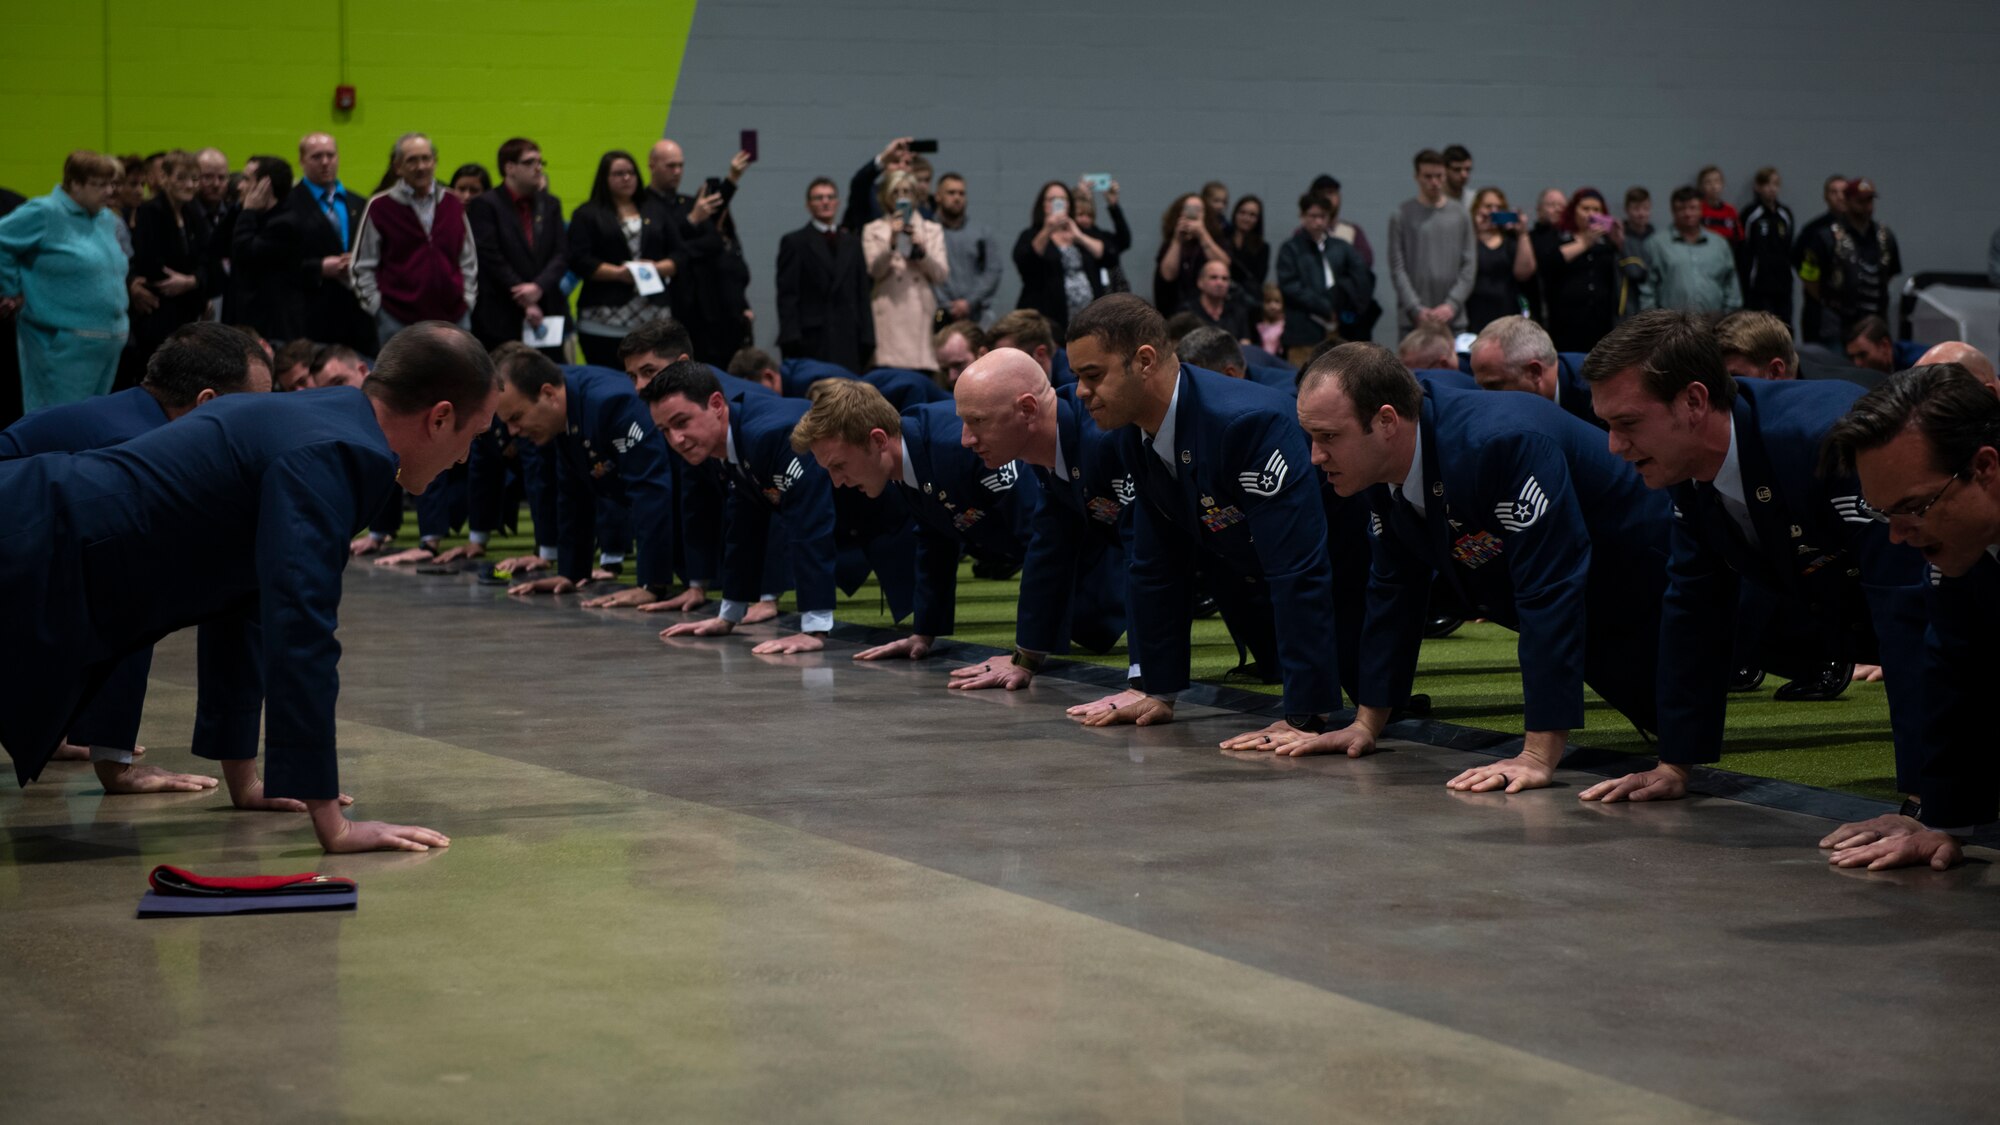 Airmen and family members perform memorial pushups in honor of U.S. Air Force Staff Sgt. Dylan Elchin, a Special Tactics combat controller with the 26th Special Tactics Squadron, during a memorial service in Moon Township, Pennsylvania, Dec. 6, 2018.